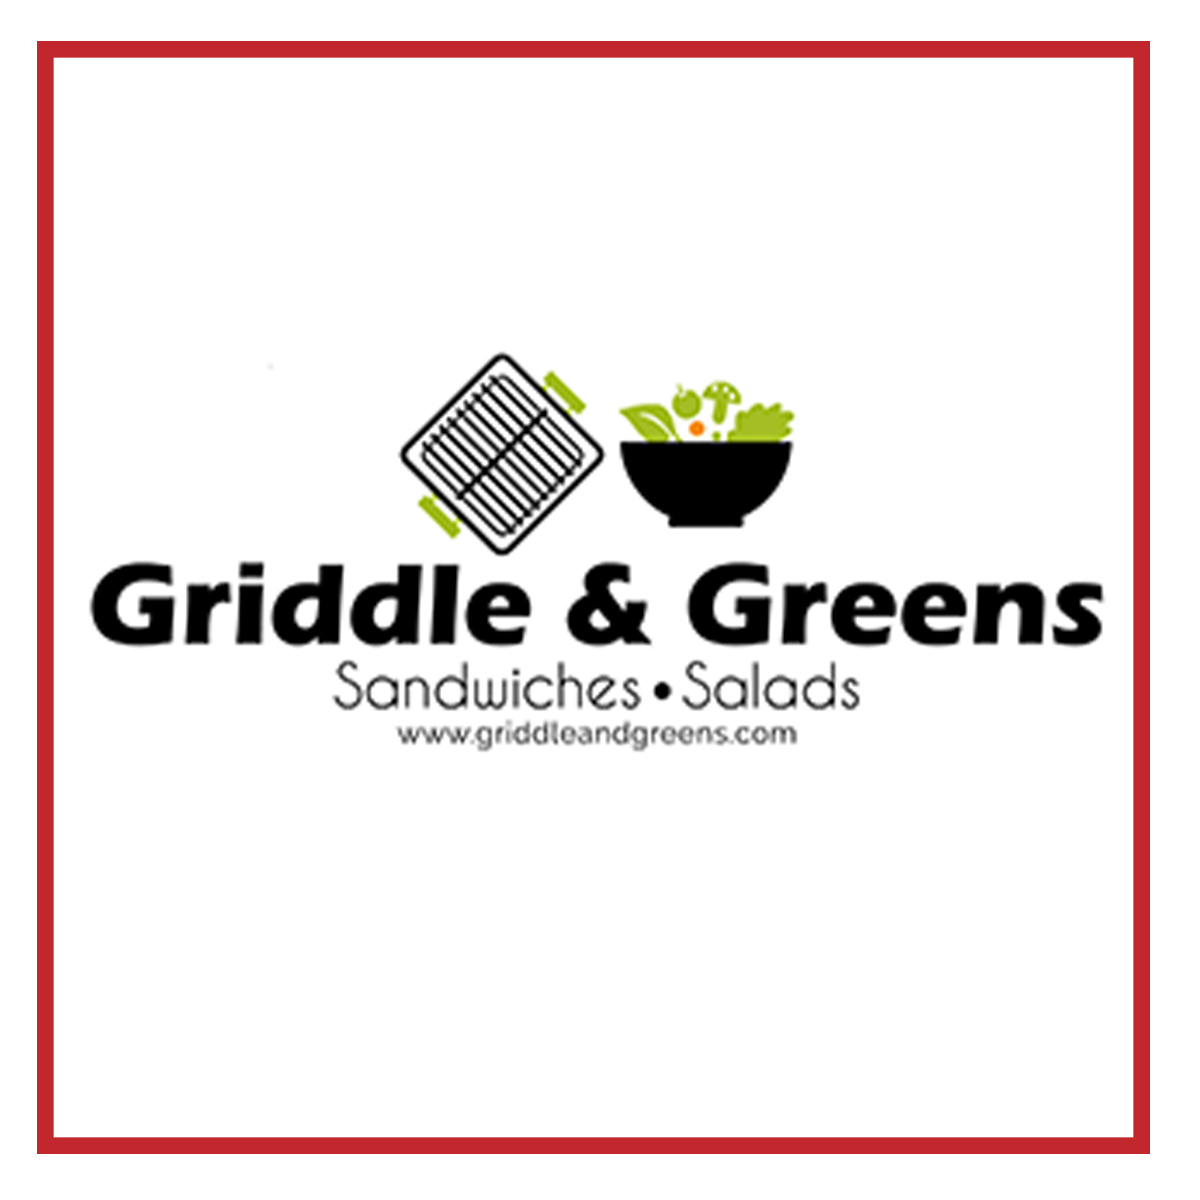 You are currently viewing Griddle & Greens